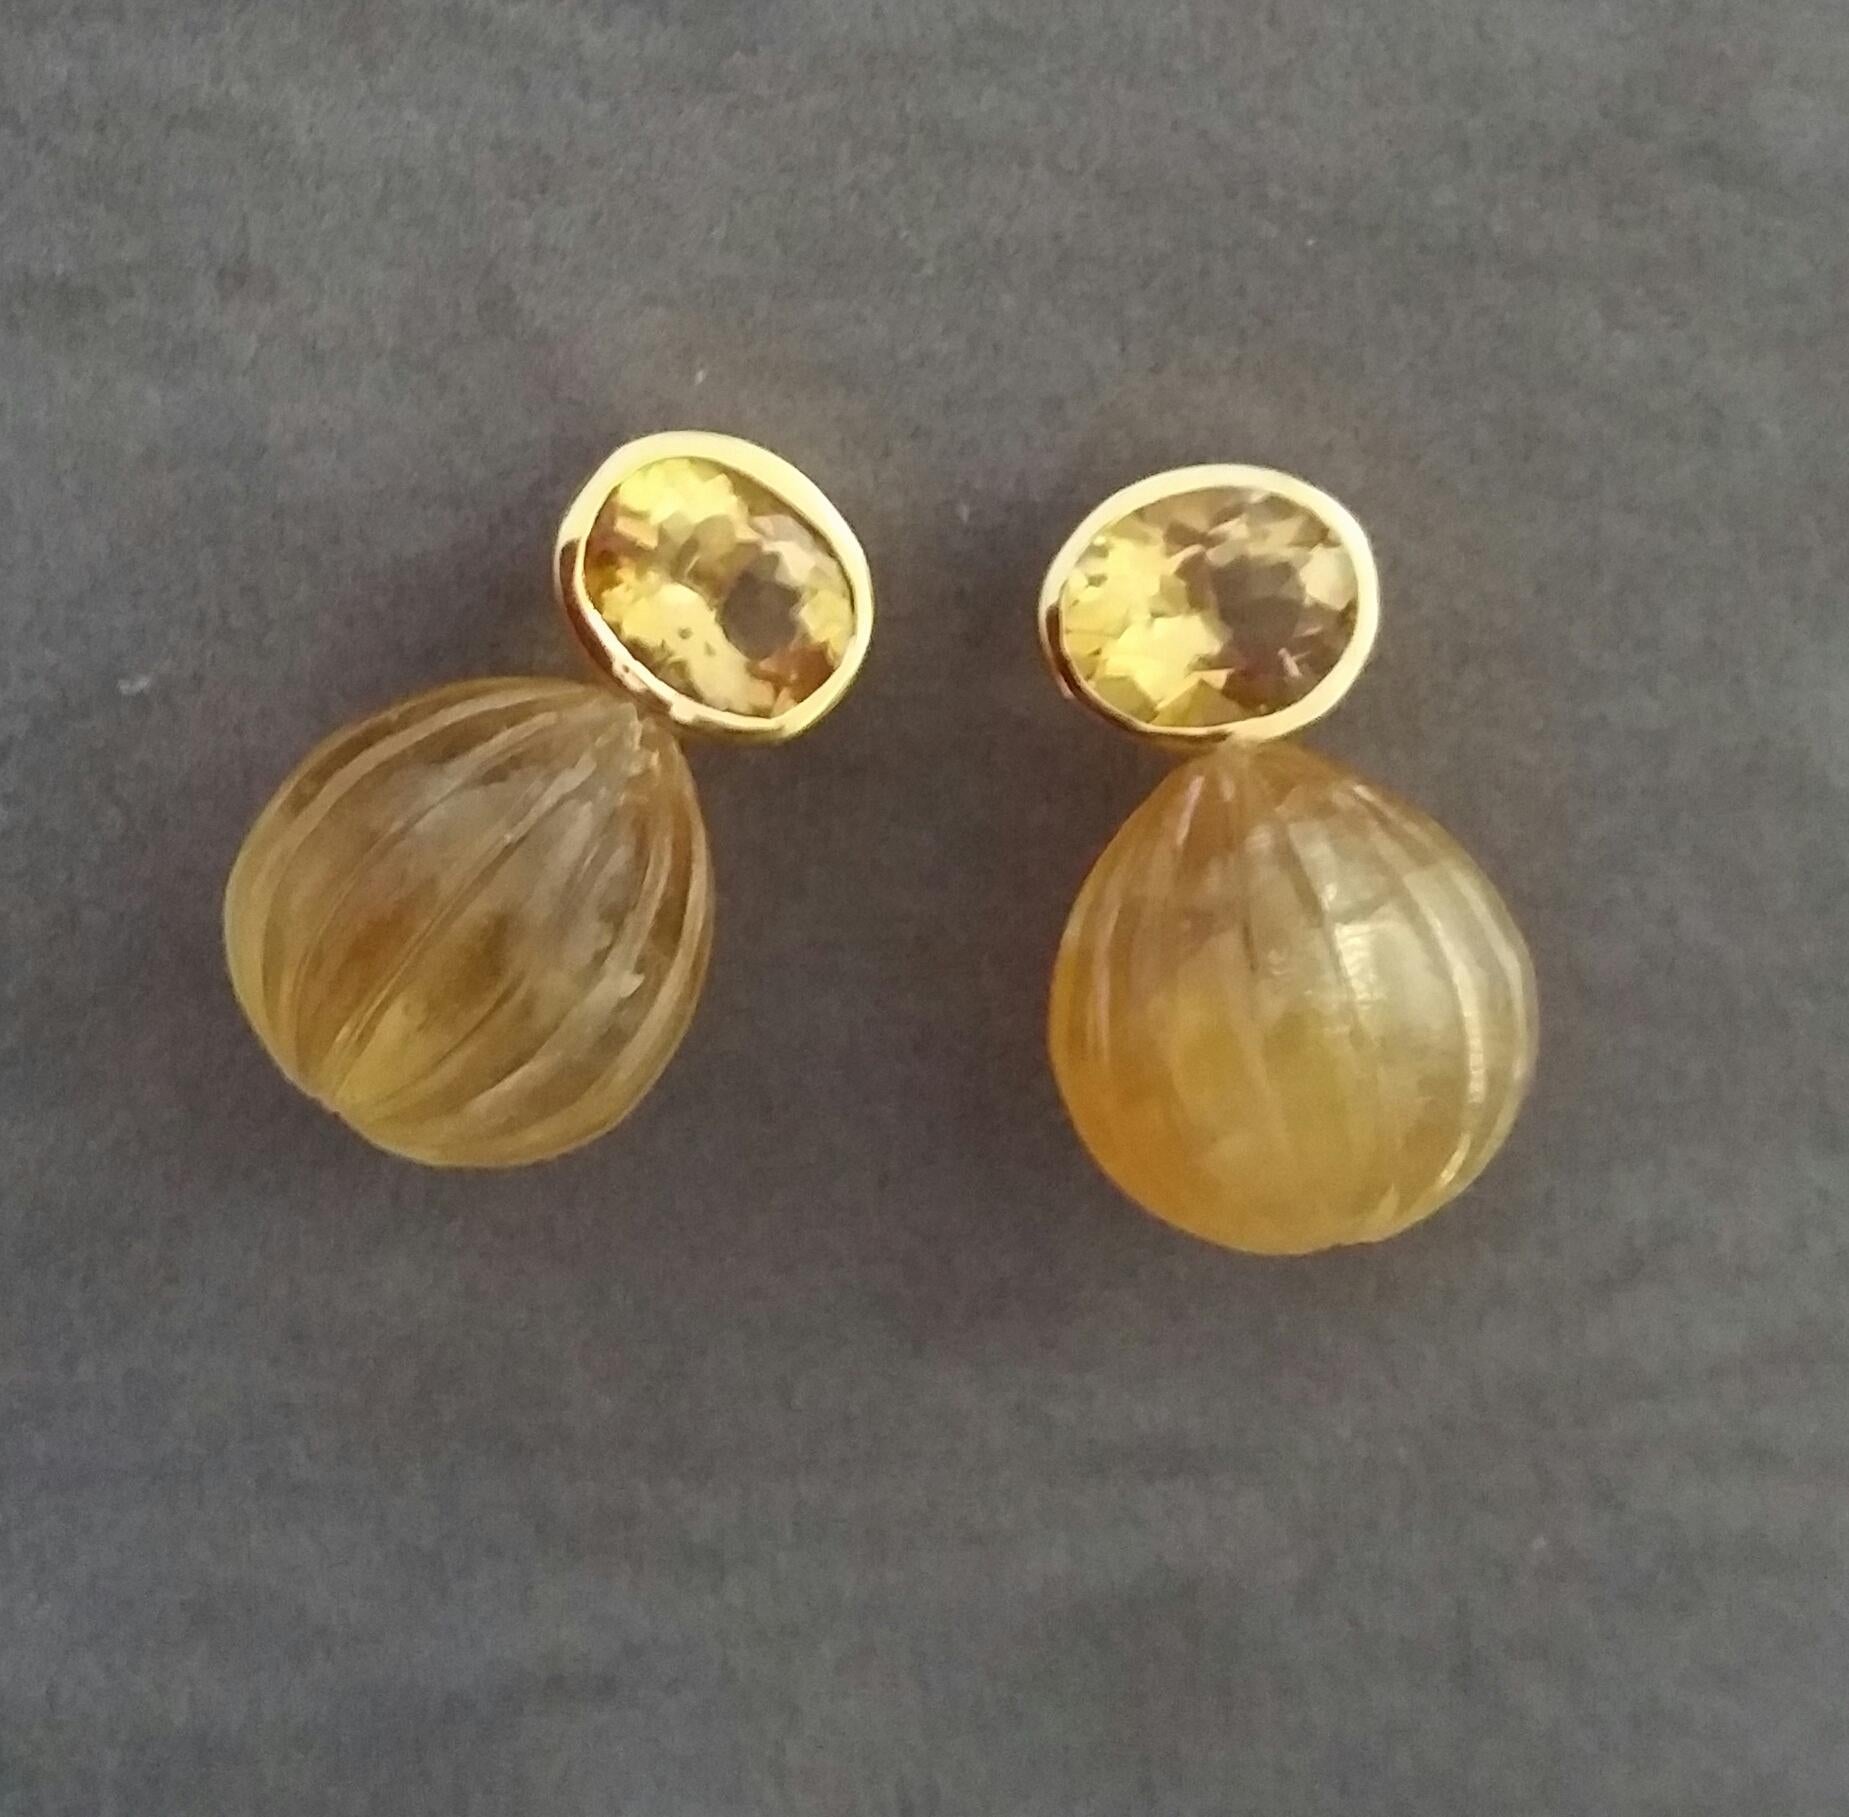 Mixed Cut Faceted Oval Shape Citrine Gold Bezel Engraved Citrine Round Drops Stud Earrings